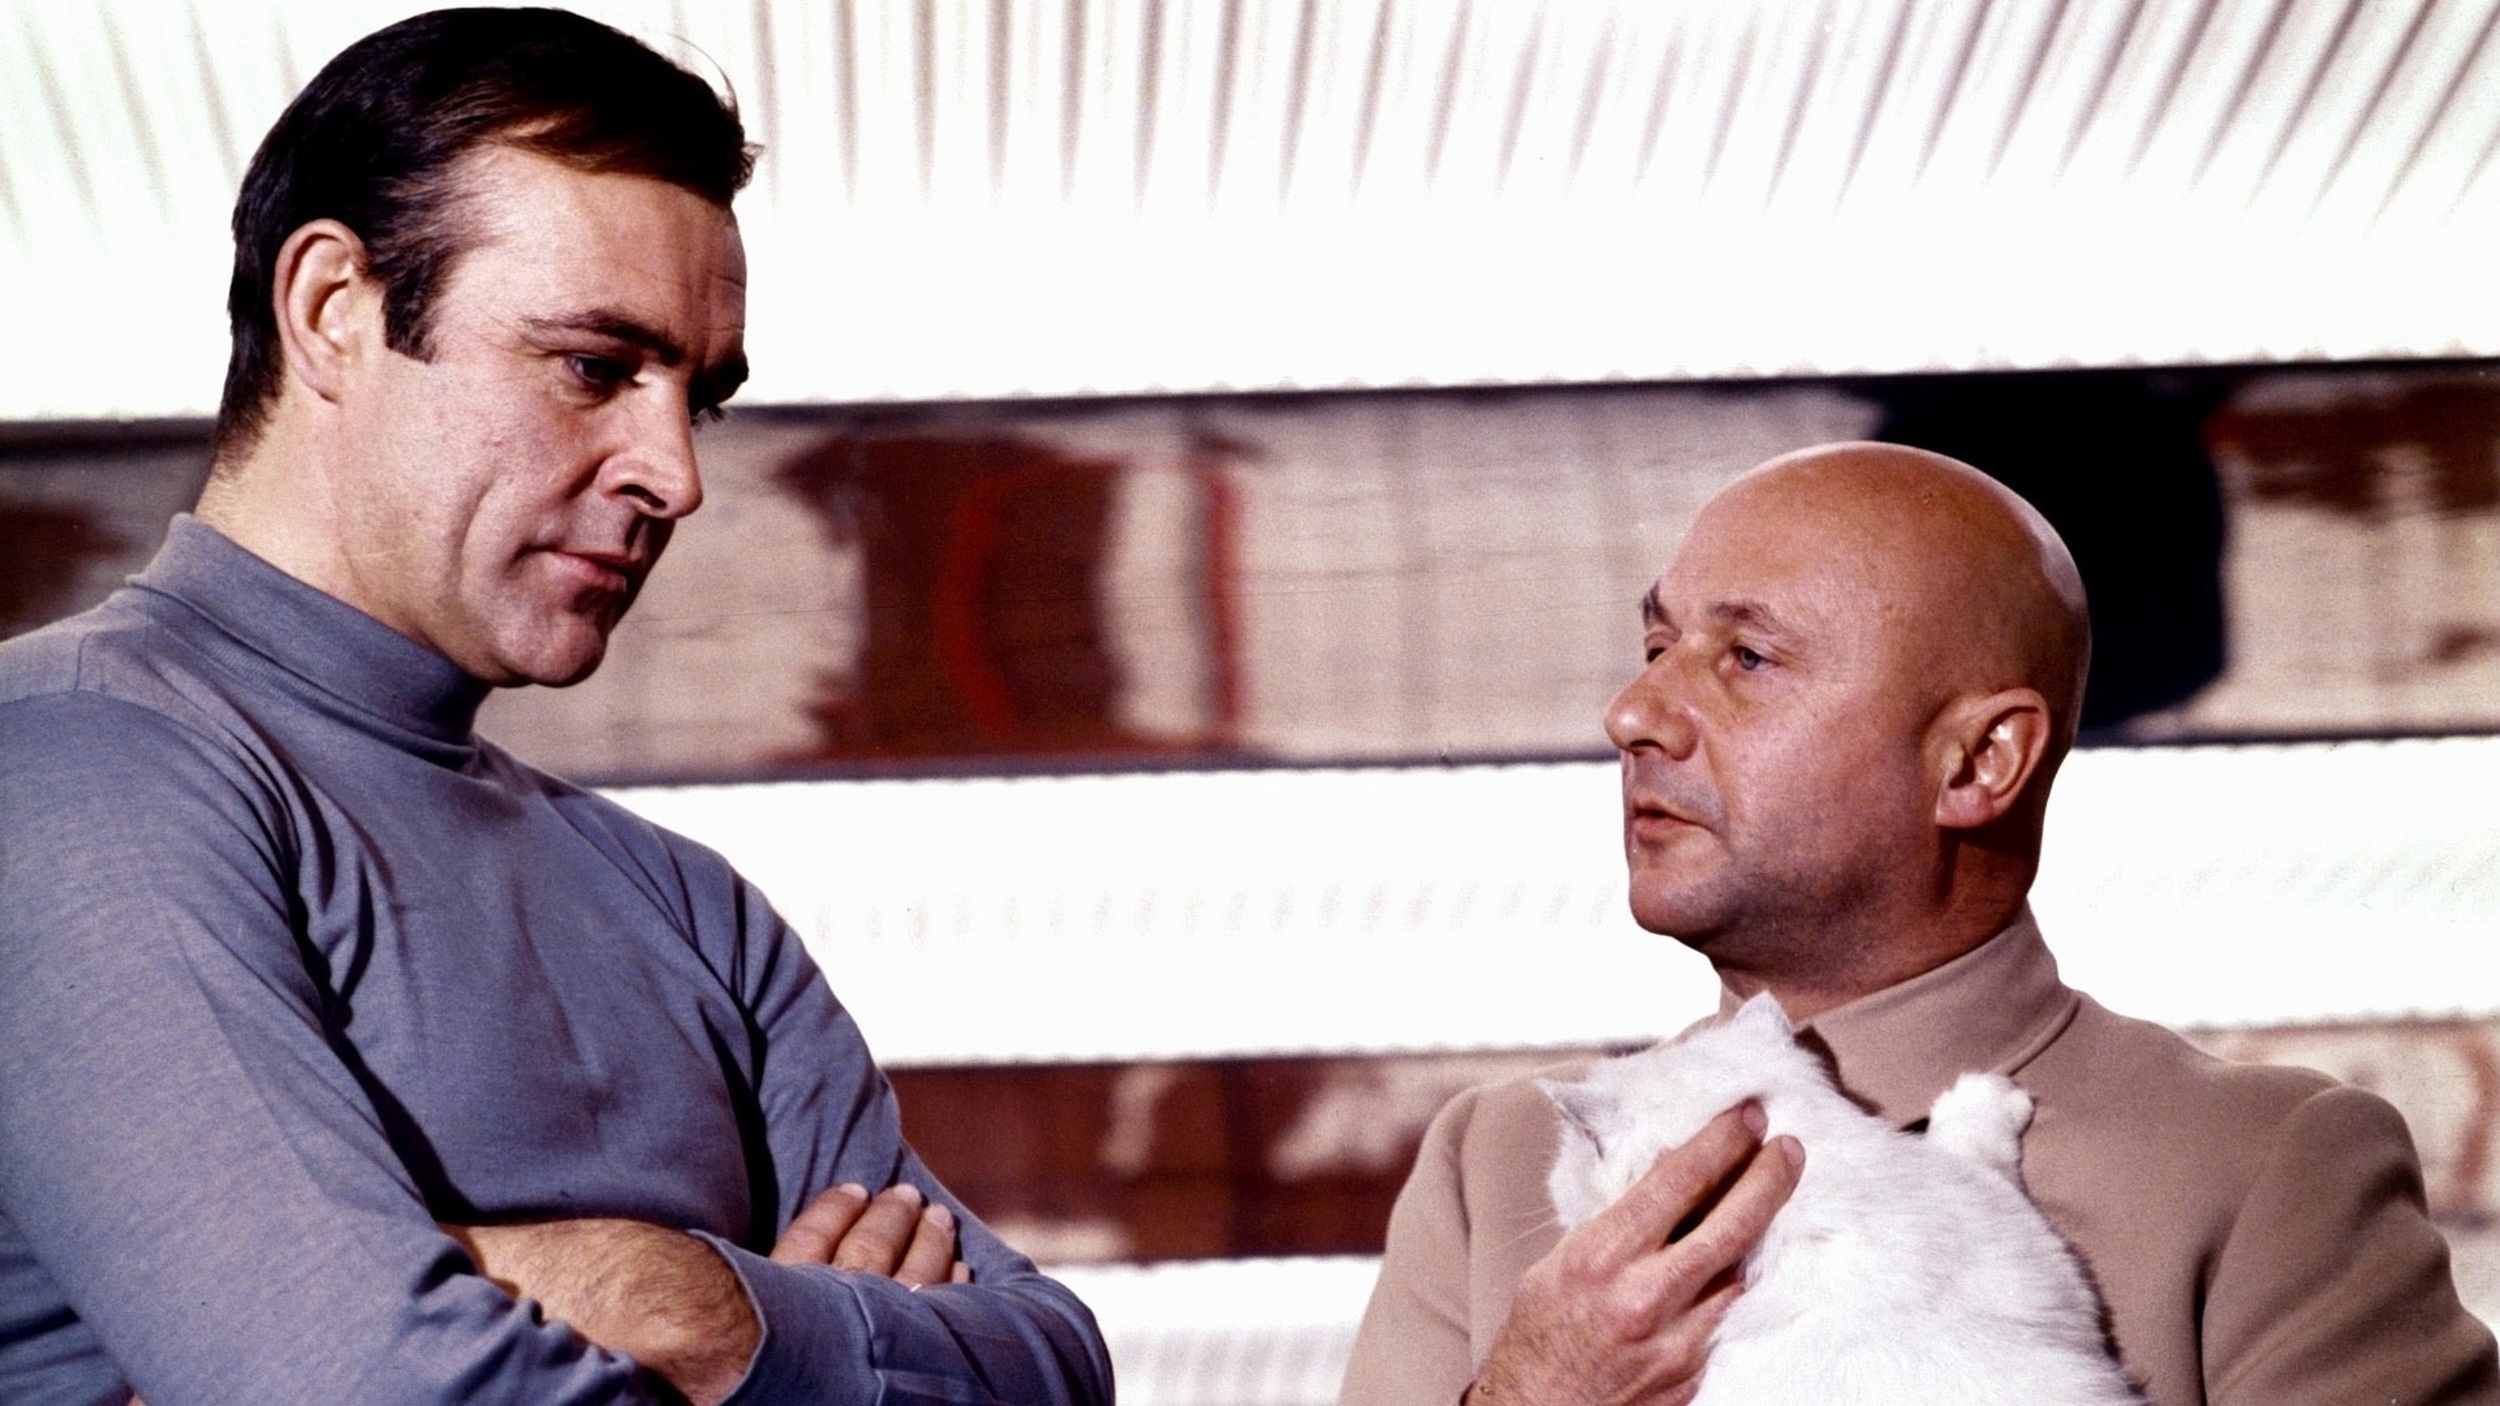 <p>Sean Connery missed his chance to do “On Her Majesty’s Secret Service” when the Bond producers balked at the location difficulties that film presented, and he opted to make this Roald Dahl-scripted, Japan-set extravaganza instead. Donald Pleasance makes for a fabulously menacing Ernst Stavro Blofeld, whose vast, volcanic lair (designed by the great Ken Adam) should look <em>very </em>familiar to fans of “The Incredibles." The wild gadgets are more deftly integrated into the fabric of this film than they were in the ludicrous “Thunderball," making this the first official course correction in the series’ history. John Barry’s gorgeously orchestrated title track (sung by Nancy Sinatra) is a top five Bond theme.</p><p><a href='https://www.msn.com/en-us/community/channel/vid-cj9pqbr0vn9in2b6ddcd8sfgpfq6x6utp44fssrv6mc2gtybw0us'>Follow us on MSN to see more of our exclusive entertainment content.</a></p>